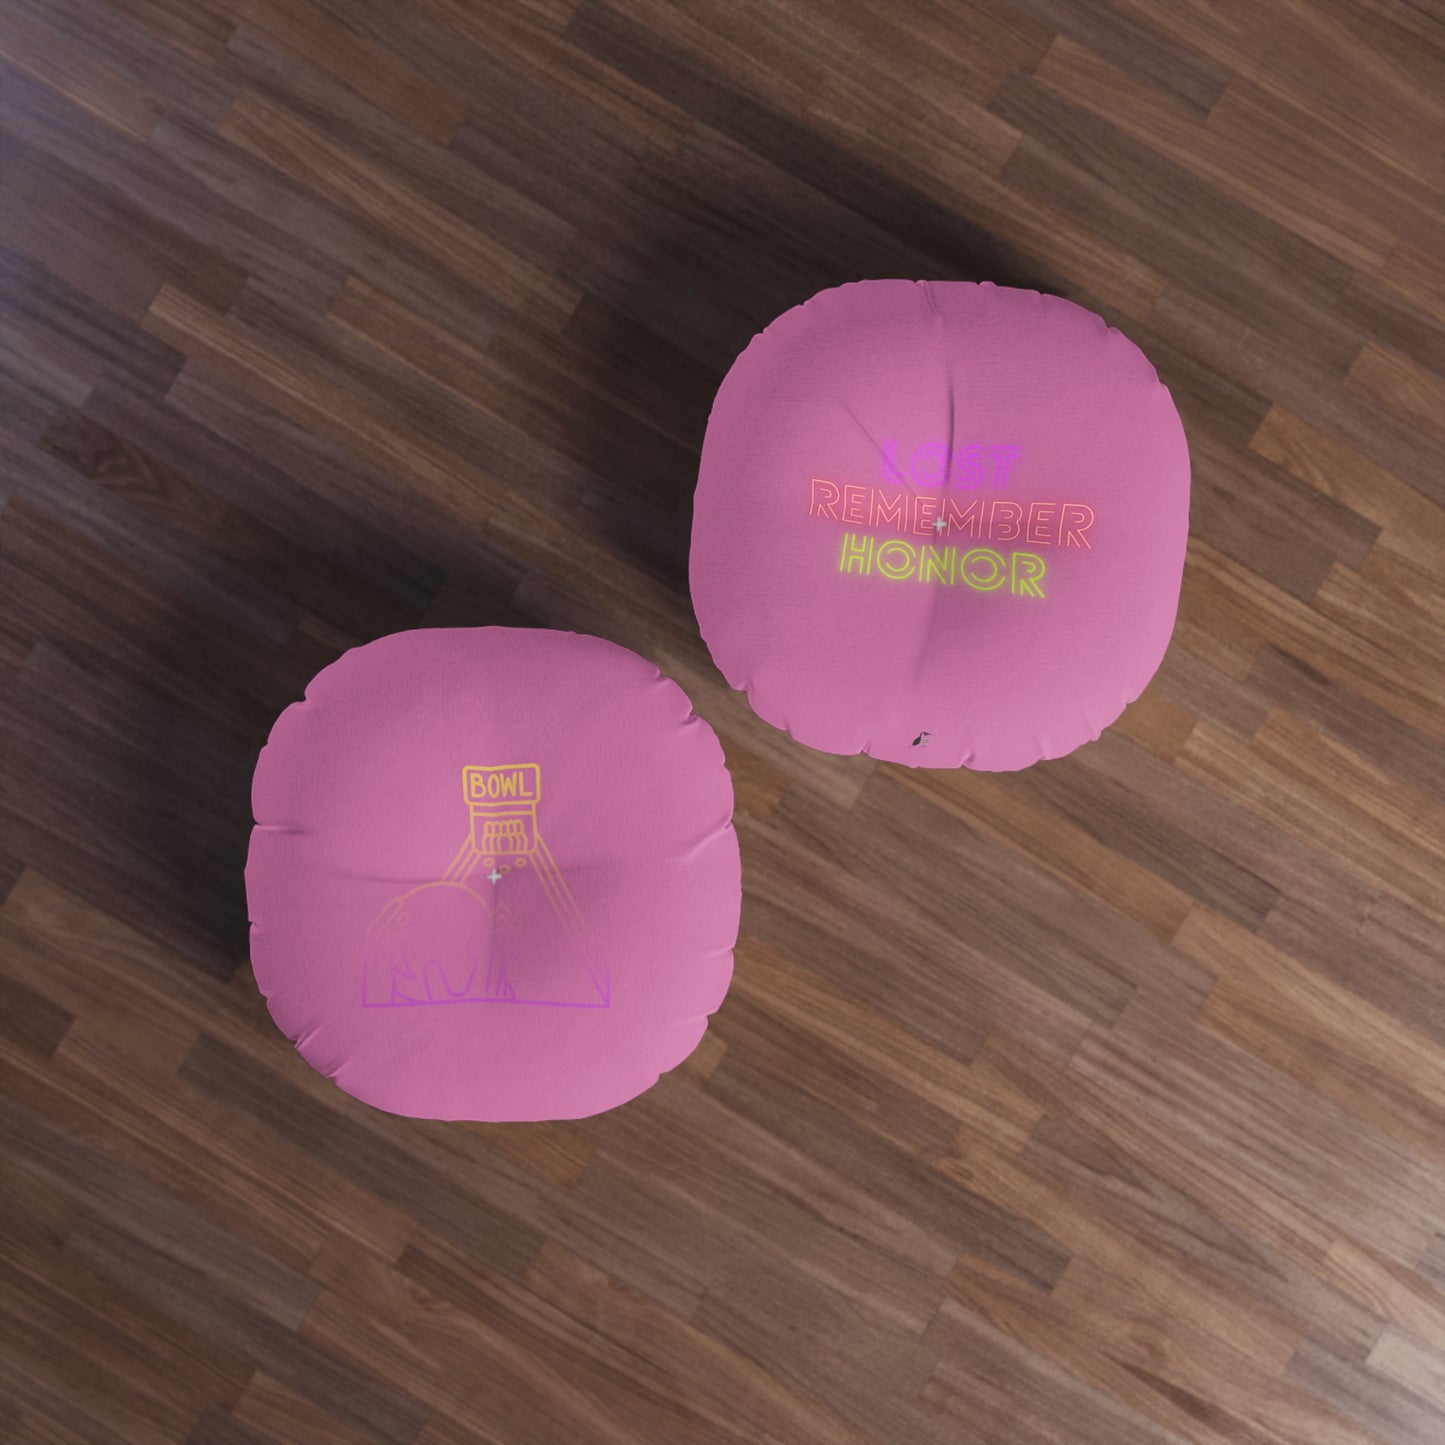 Tufted Floor Pillow, Round: Bowling Lite Pink